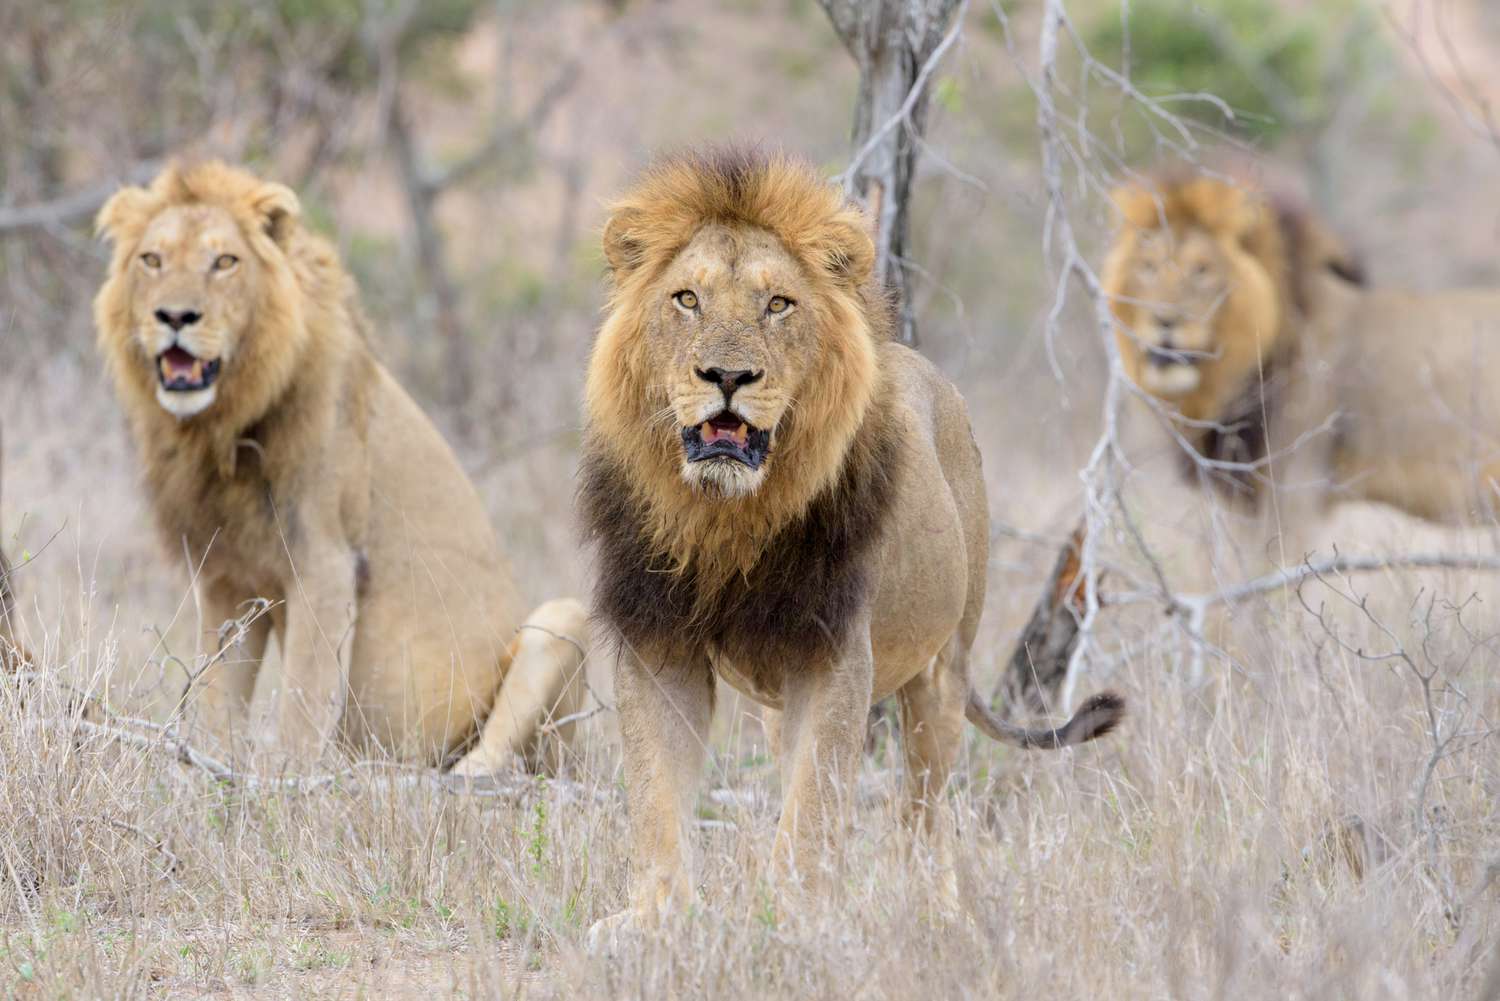 male-lion-coalition-in-the-wilderness-of-africa-1206719031-8412be026591453692a1594a21609231.jpg